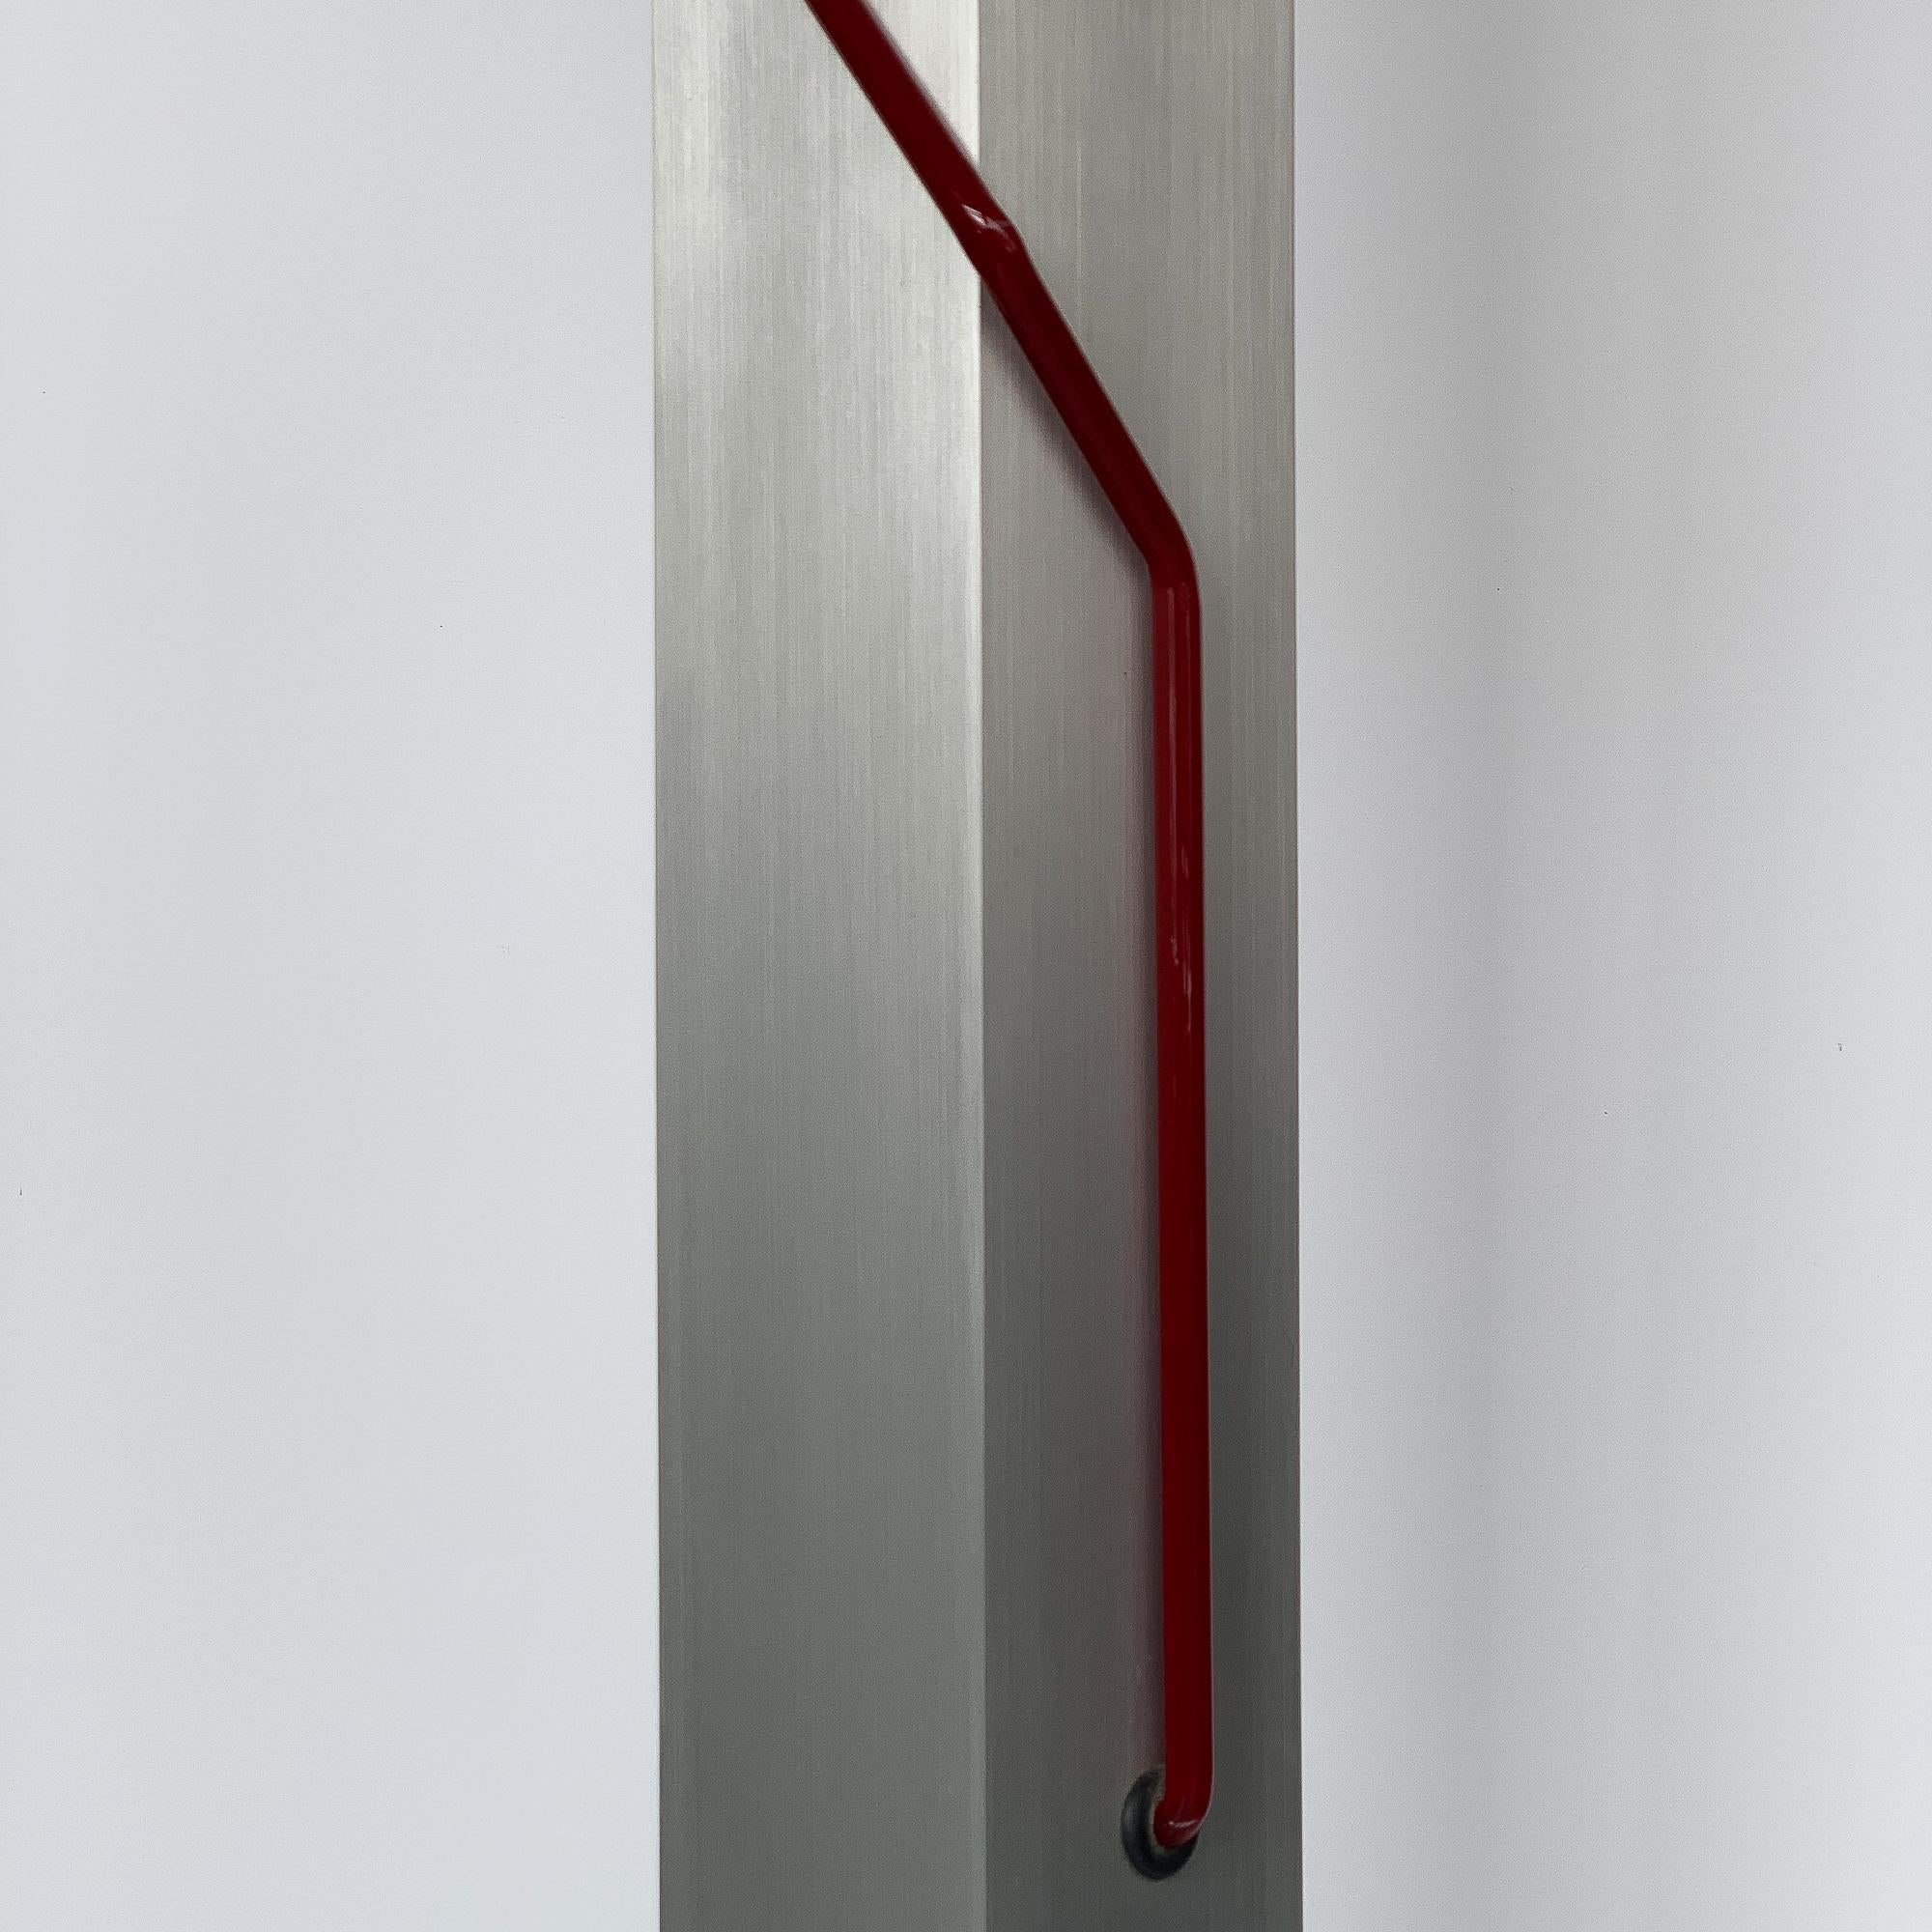 Rare Red Neon and Aluminum Floor Lamp by Rudi Stern and Don Chelsea for Kovacs 3